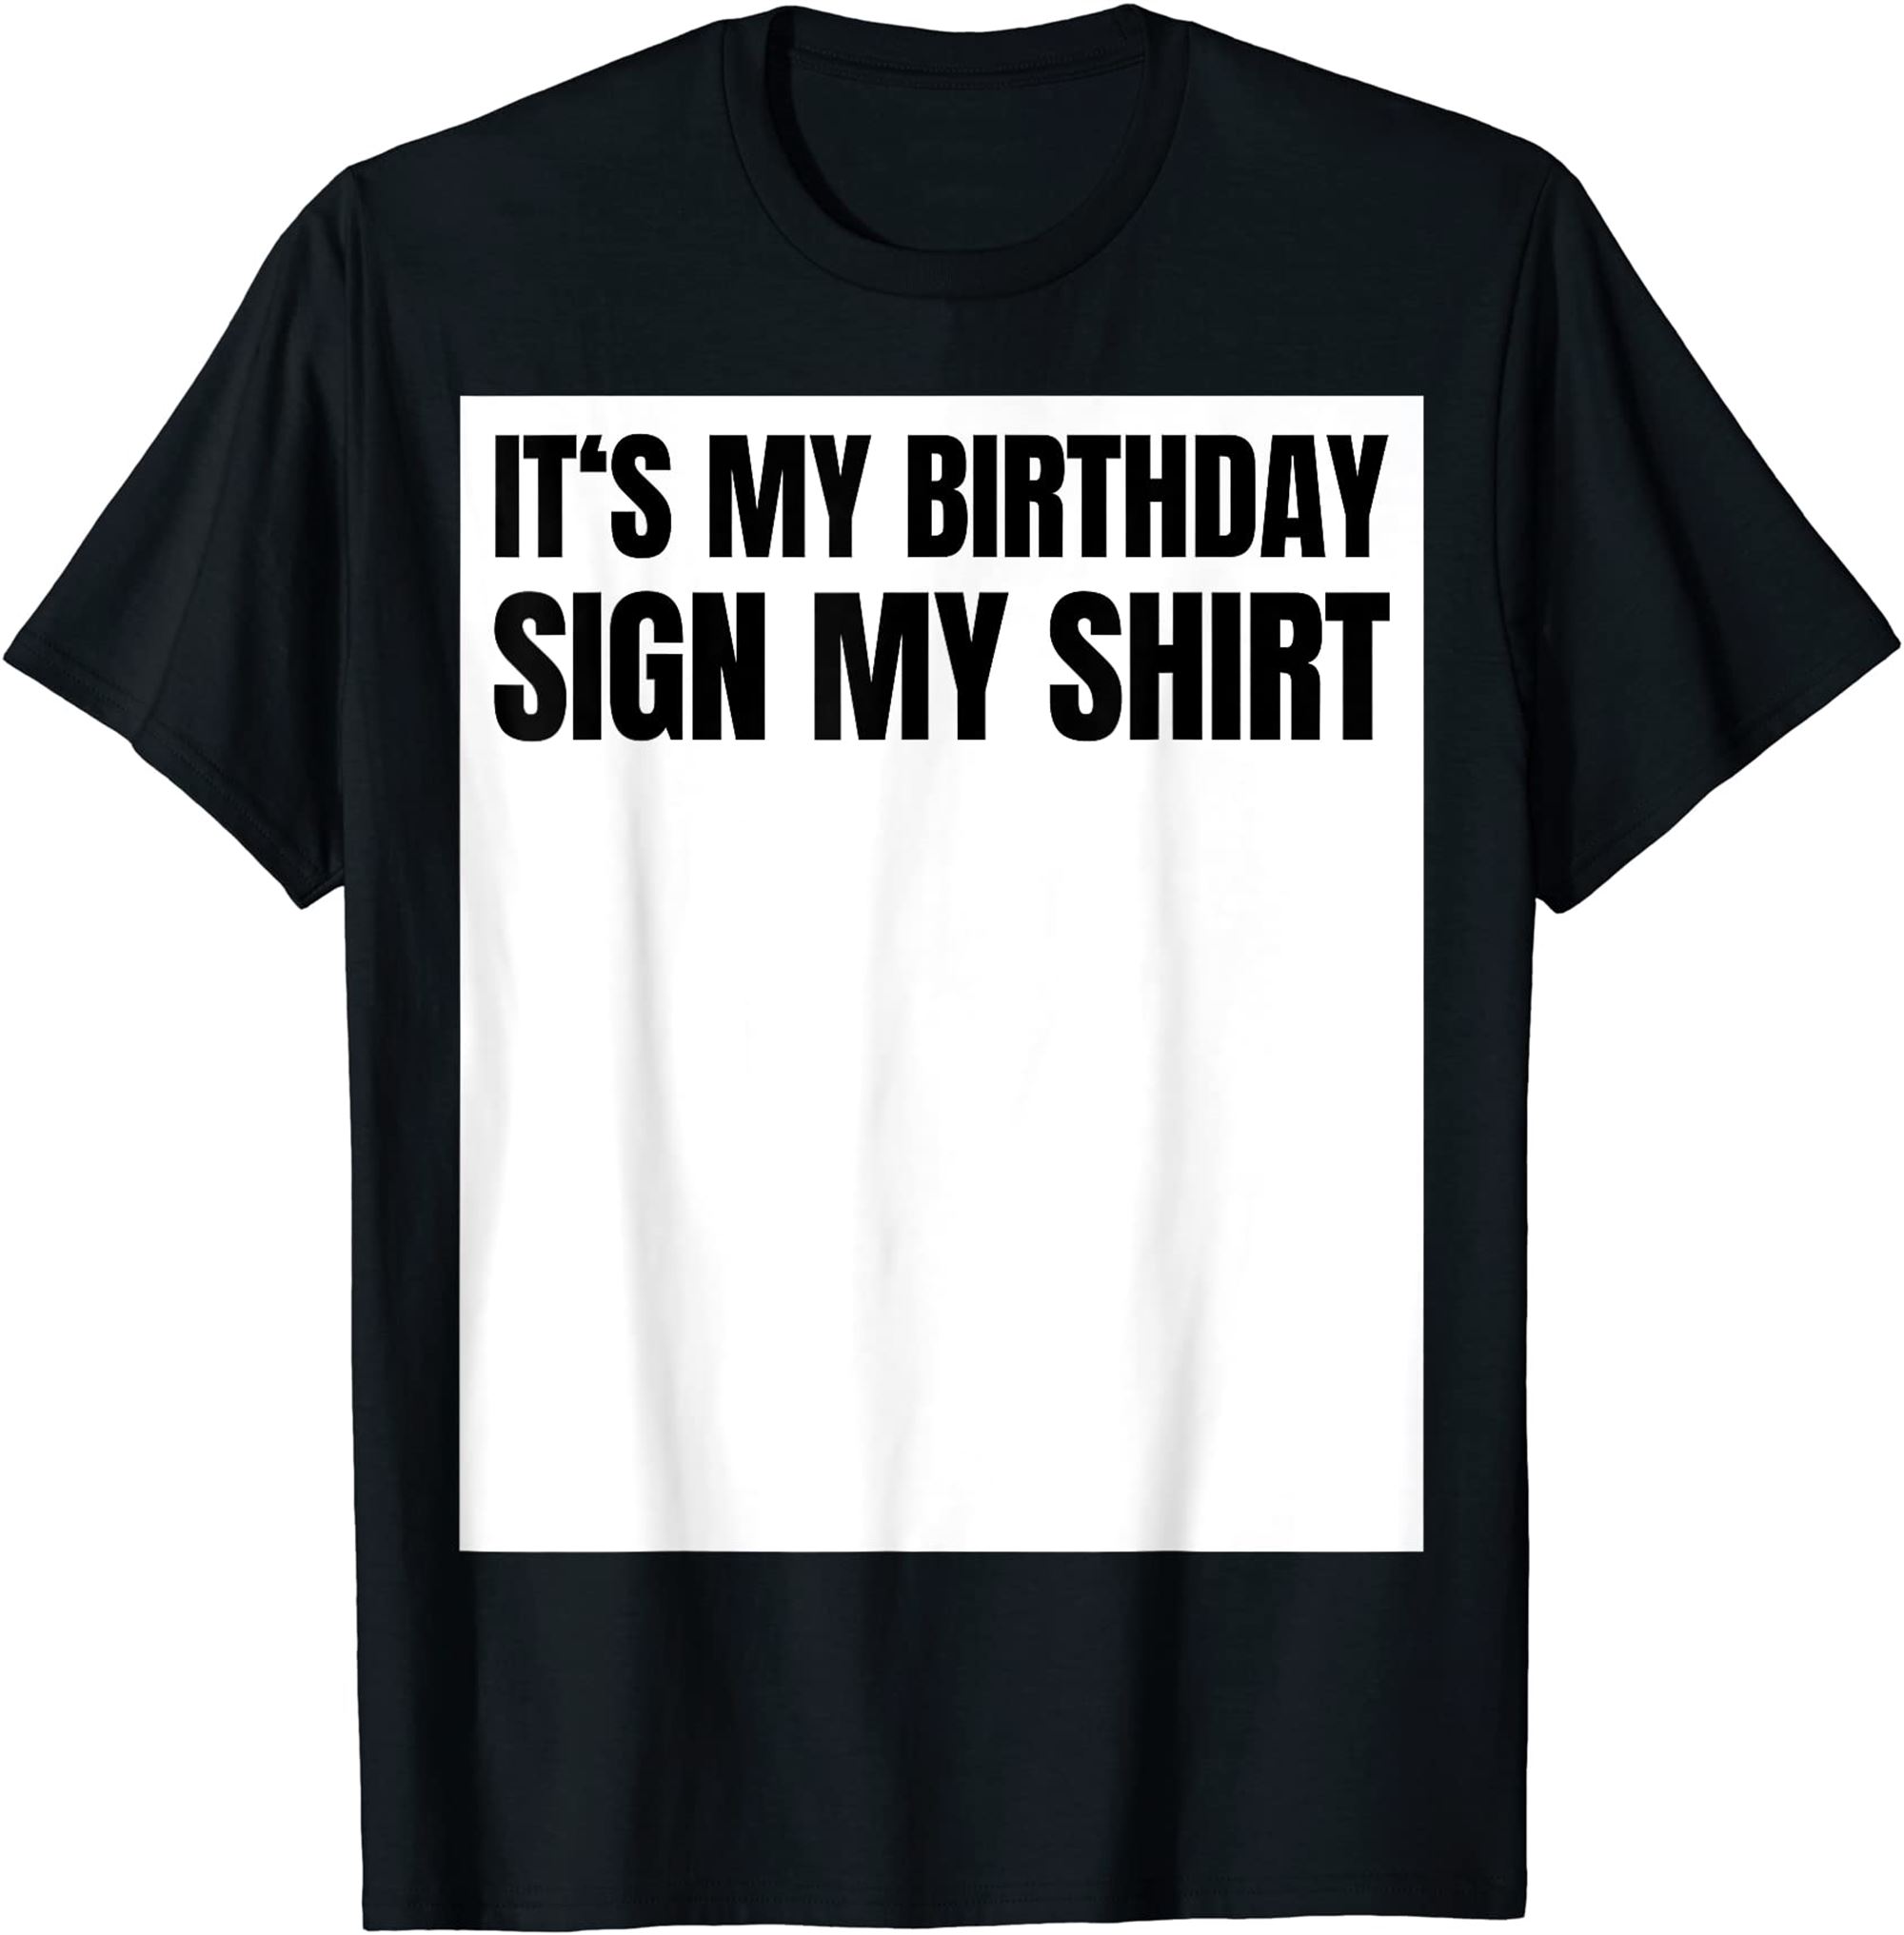 Sign My Shirt Birthday Gift Party Ice Breaker Mens Womens T-shirt Size Up To 5xl